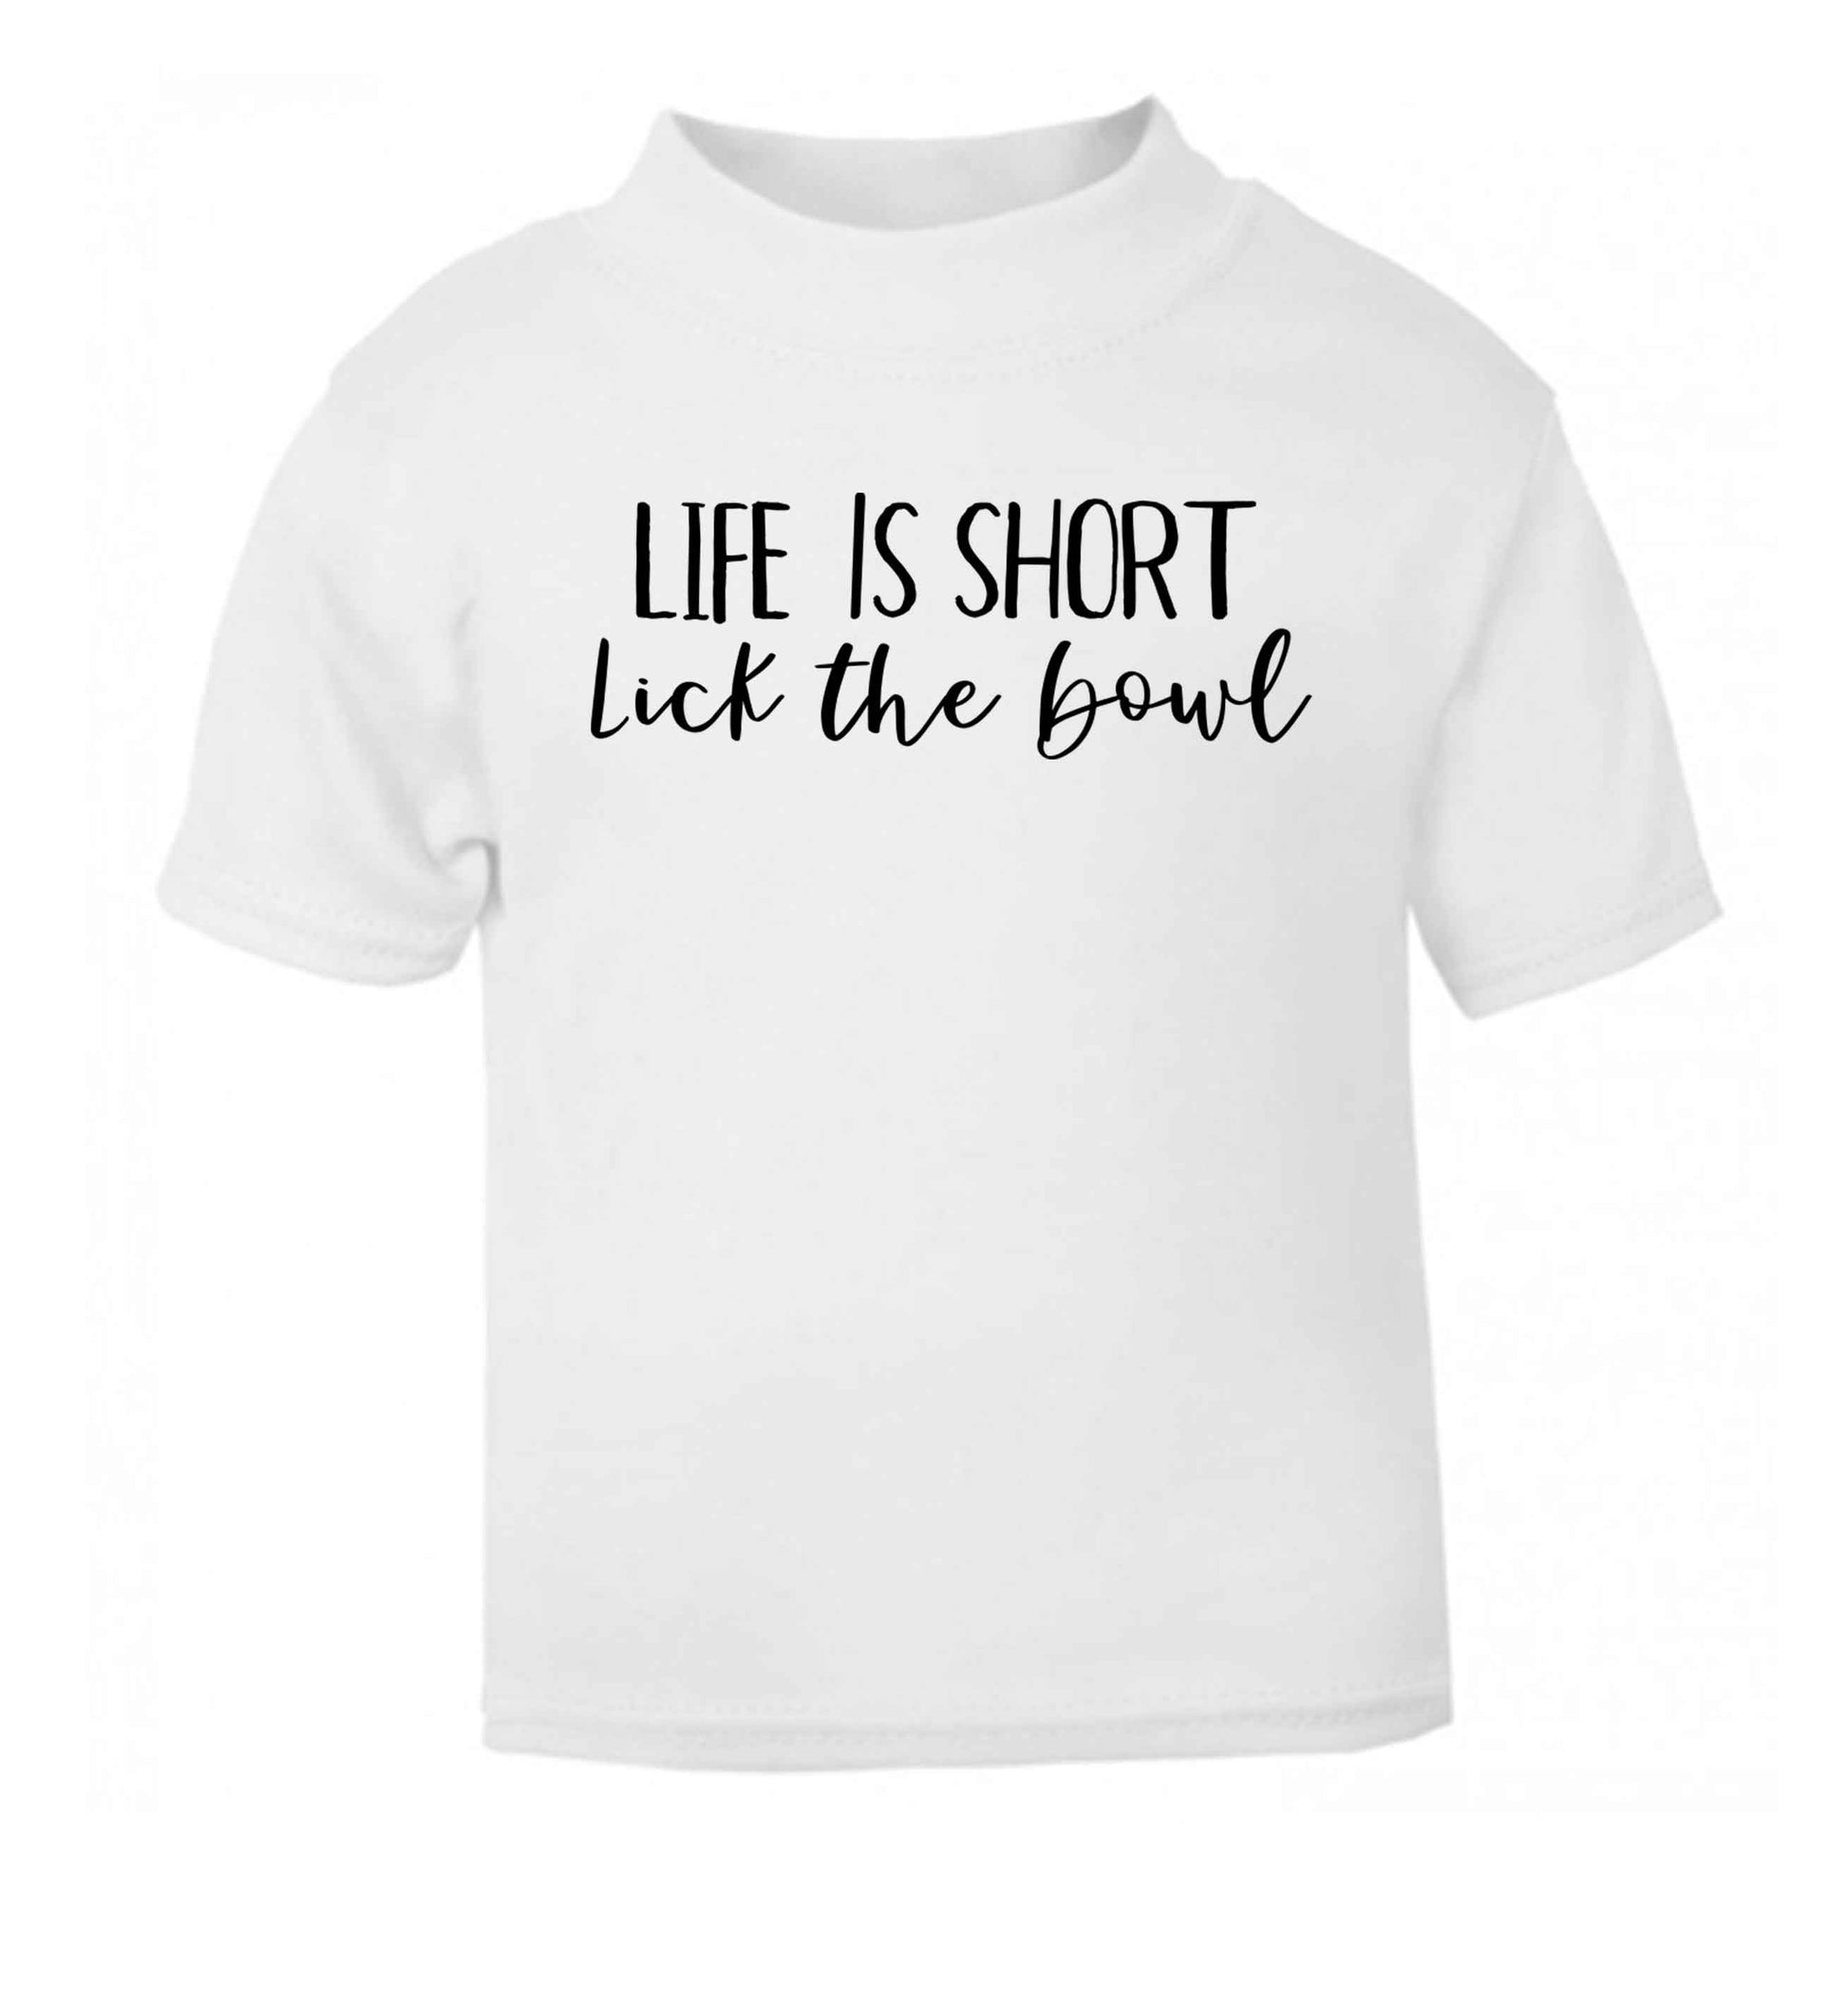 Life is short lick the bowl white Baby Toddler Tshirt 2 Years